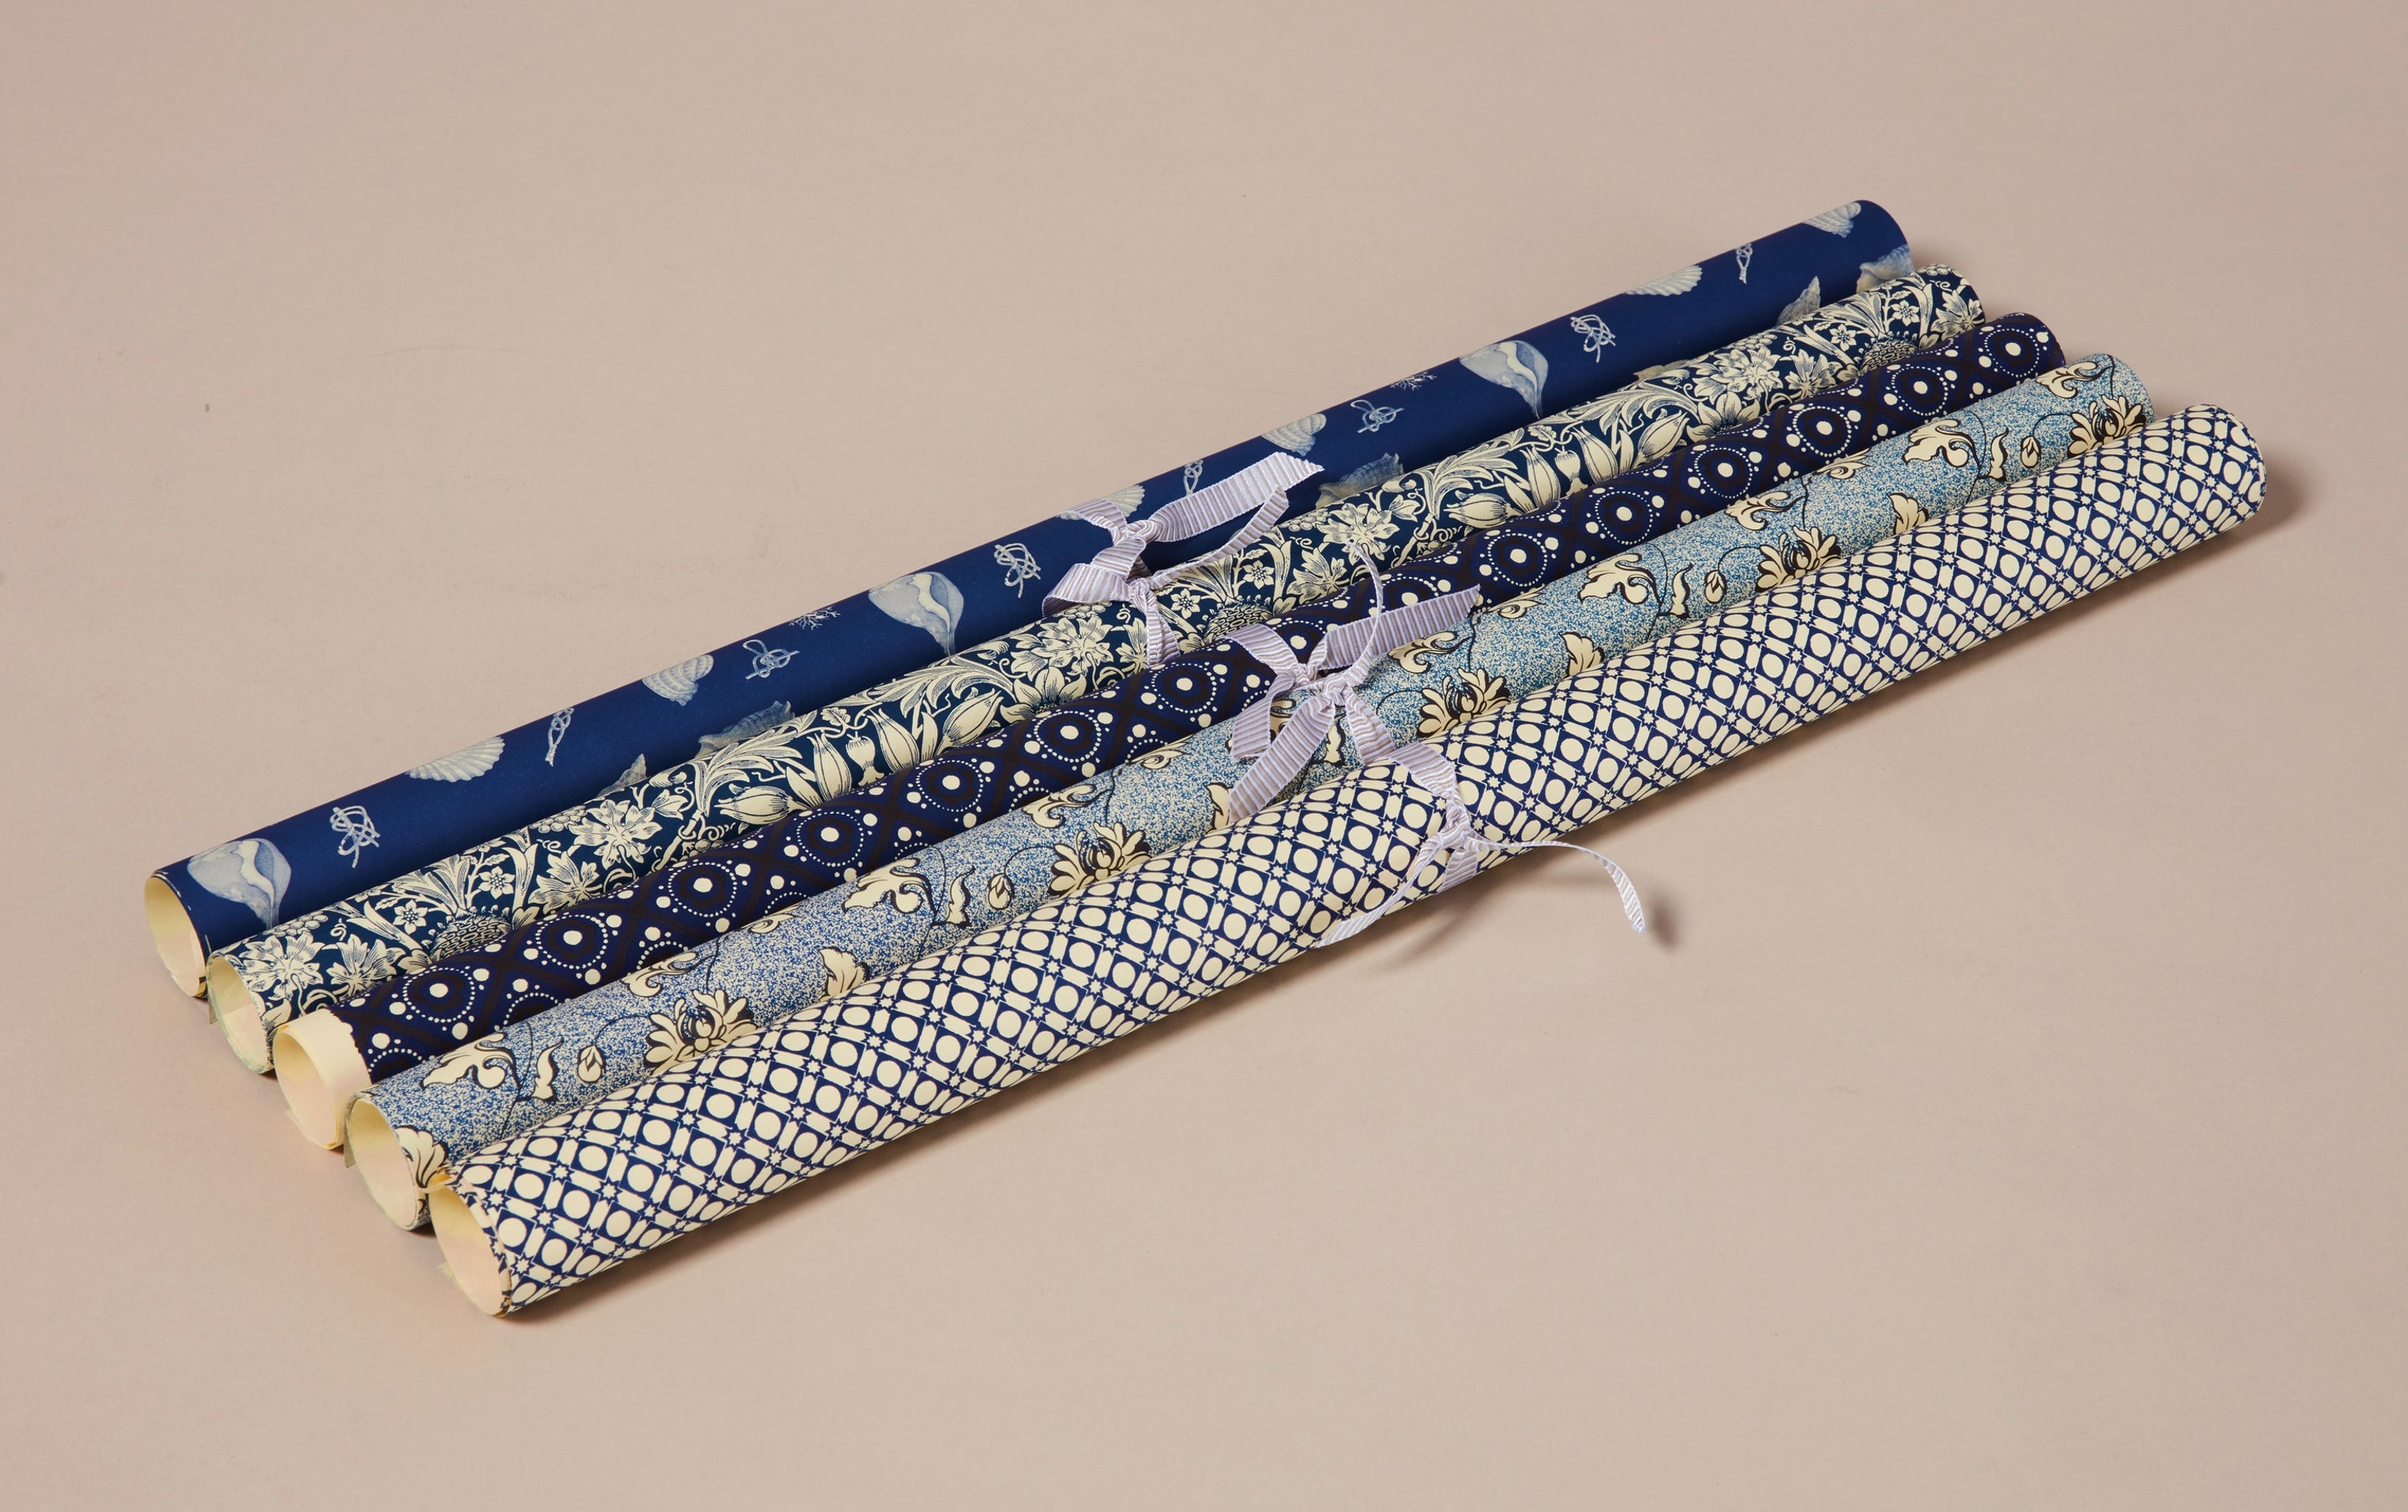 Assorted Wrapping Papers, Blues